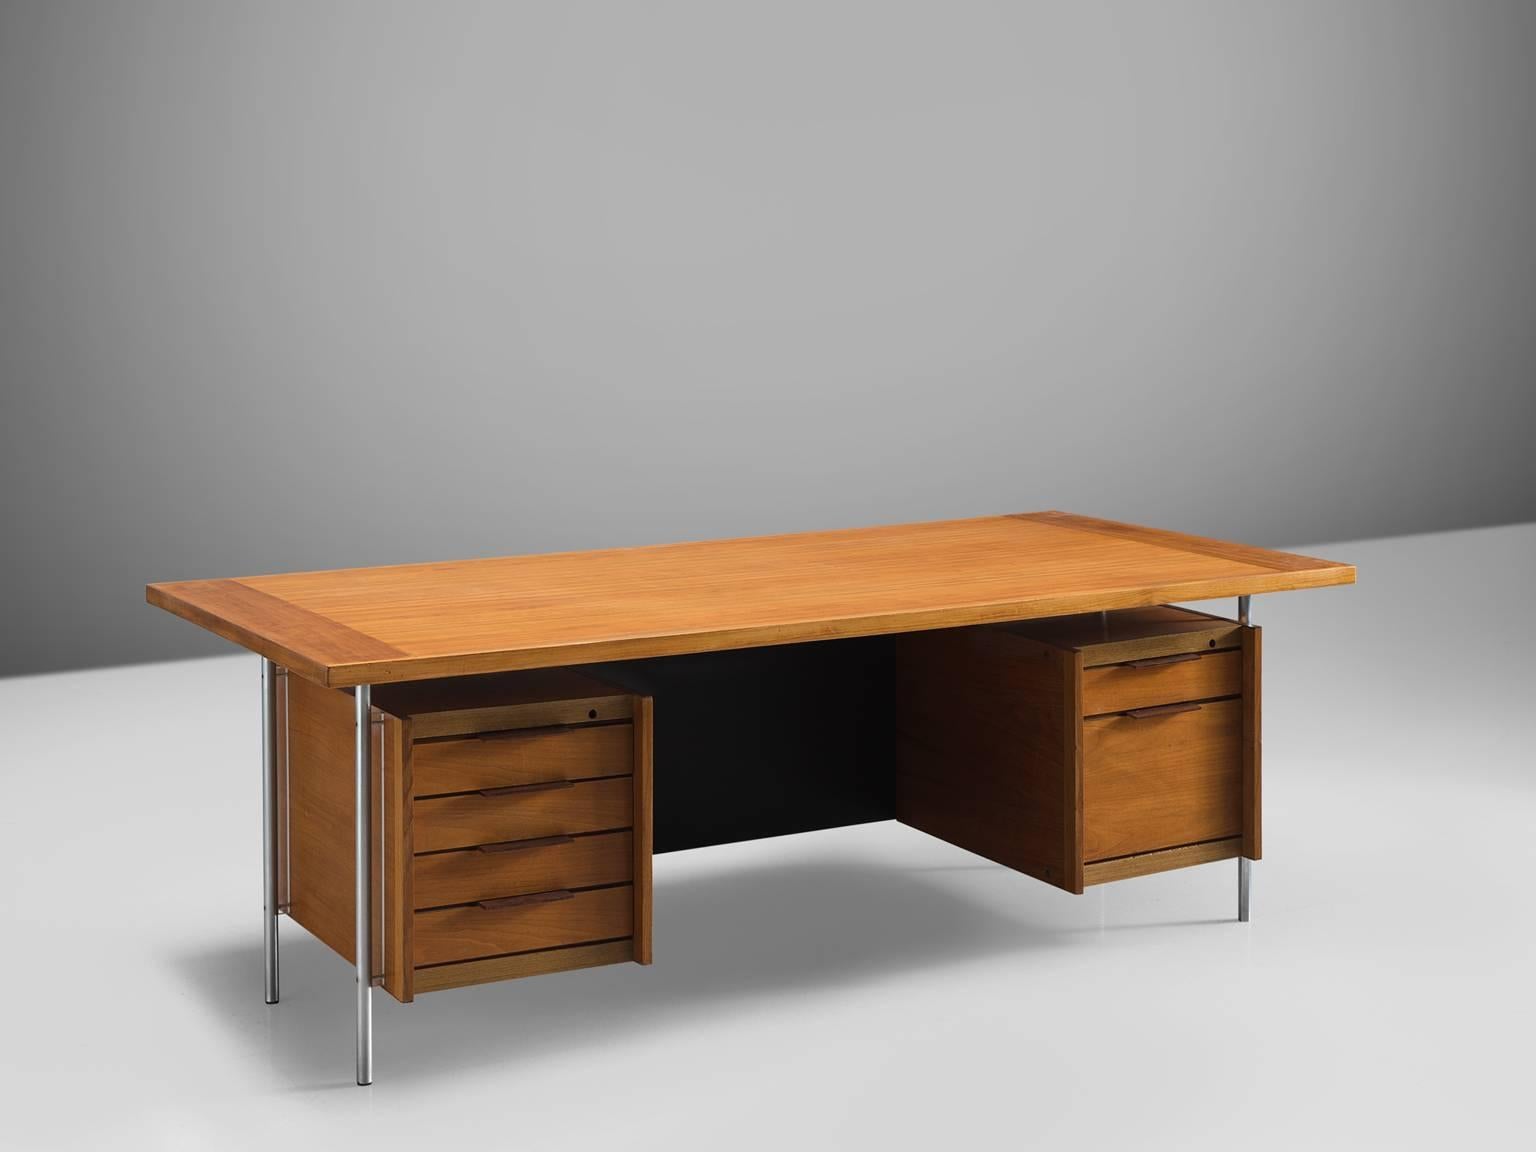 Sven Ivad Dysthe, desk, walnut, leather, steel, Norway, 1950s

This modest desk is part of the midcentury design collection. The desk has a tubular steel base and elegantly designed Lucite details between the base and the drawer units. The handles